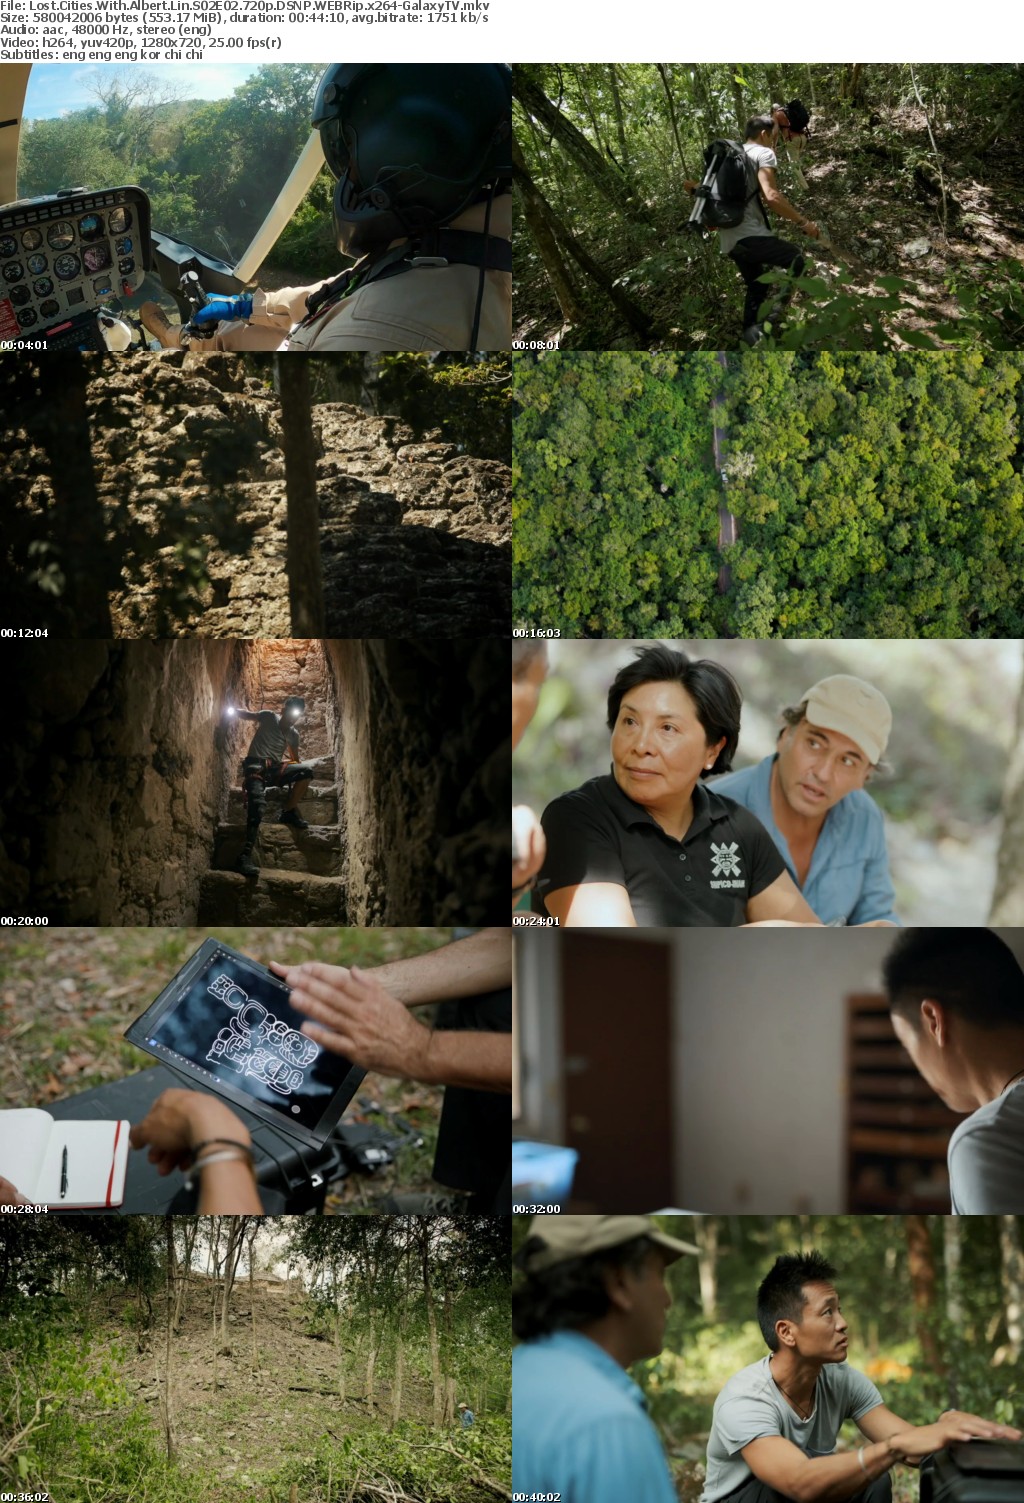 Lost Cities With Albert Lin S02 COMPLETE 720p DSNP WEBRip x264-GalaxyTV